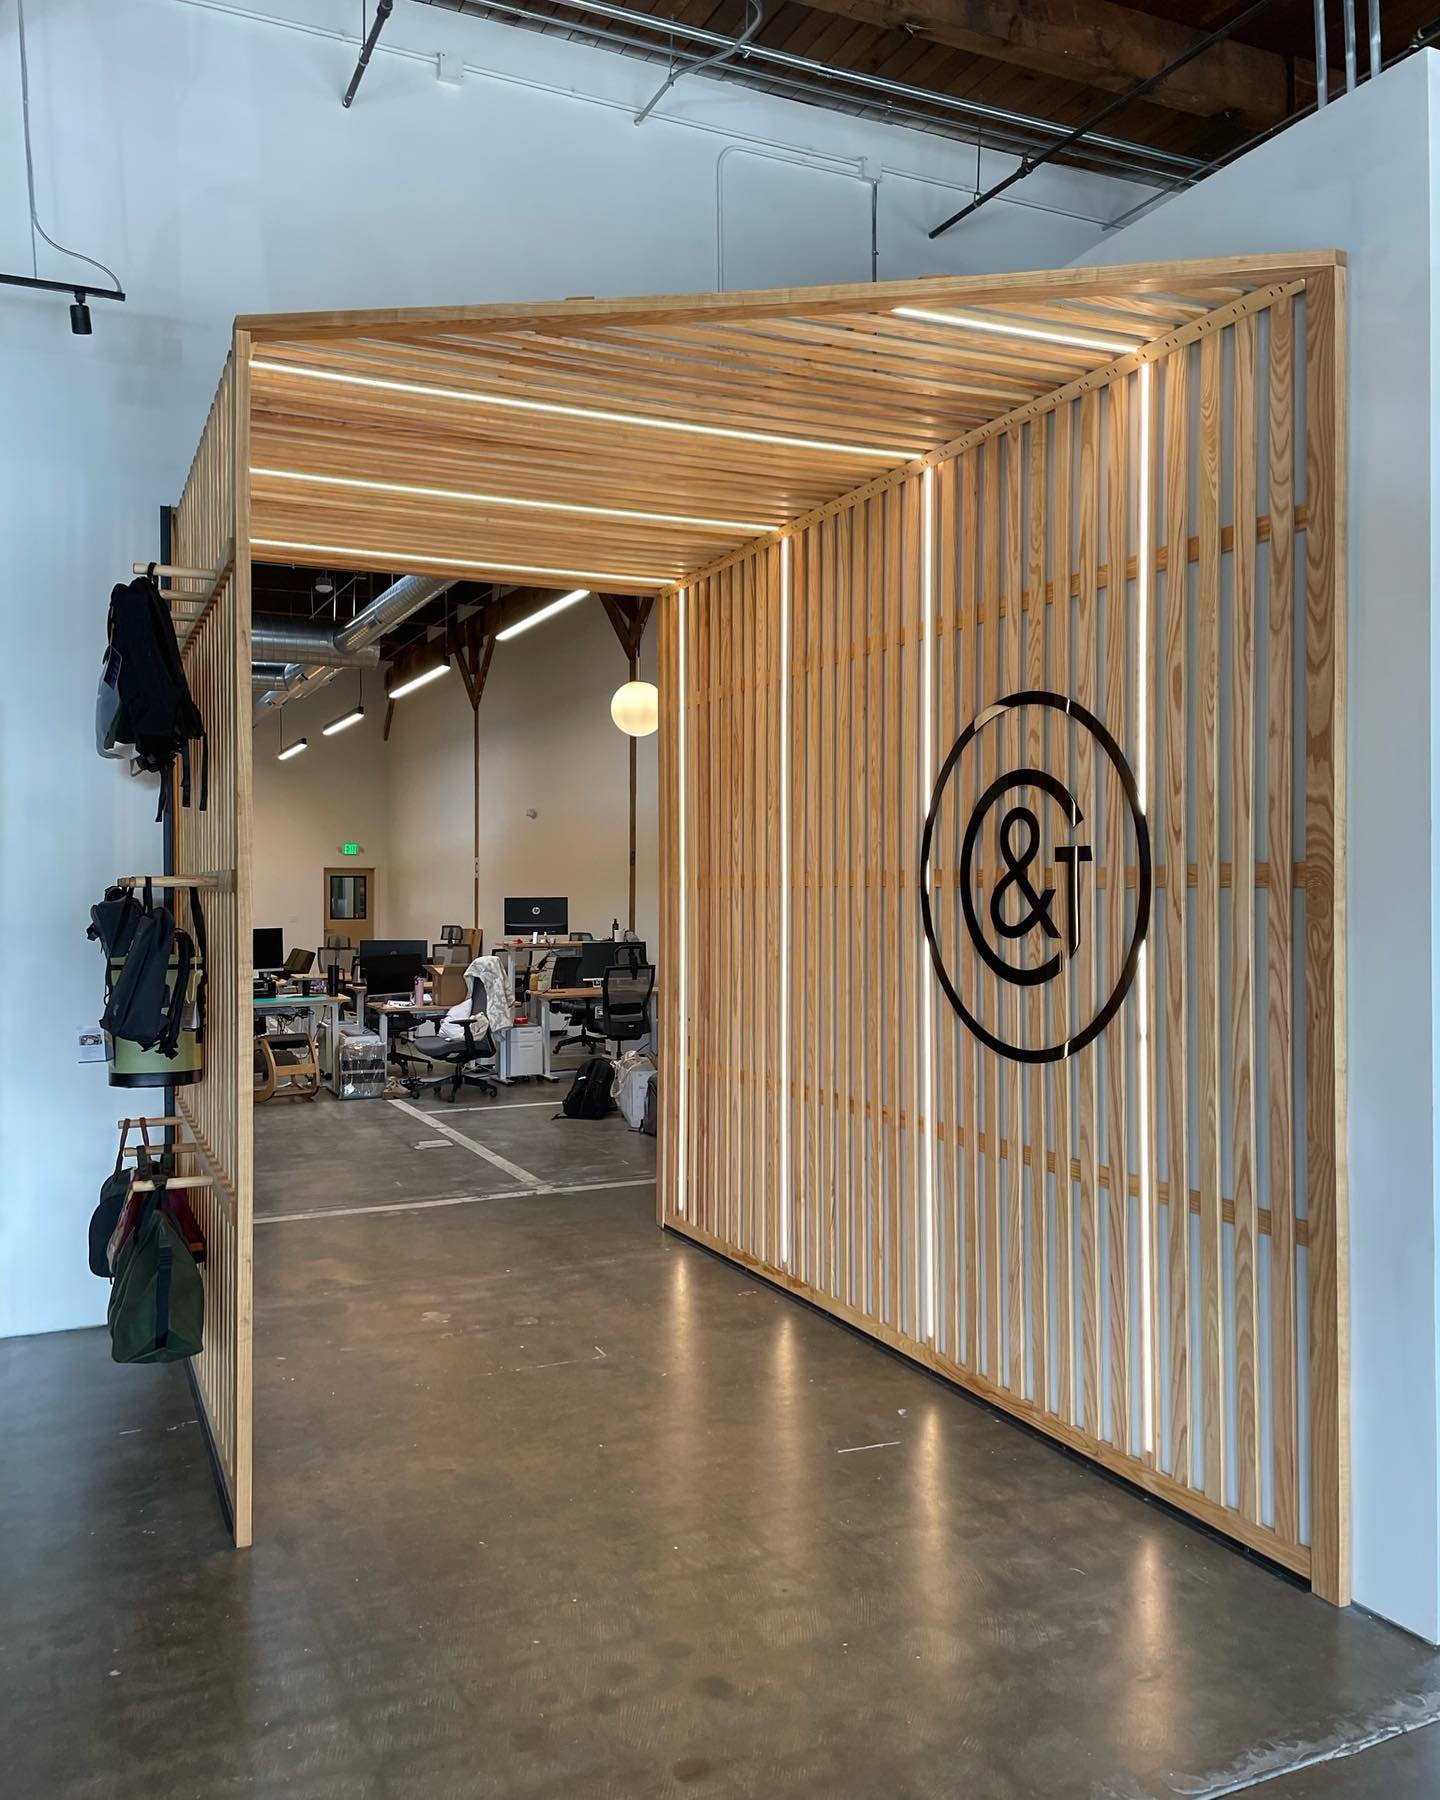 Ever stepped through a portal to get to work each day? This beautiful additional makes for a creative atmosphere for the team at Clove &amp; Twine. Designed by @unum_collaborative and executed by us!

#putsomewoodonit #Furniture #InteriorDesign #Furn